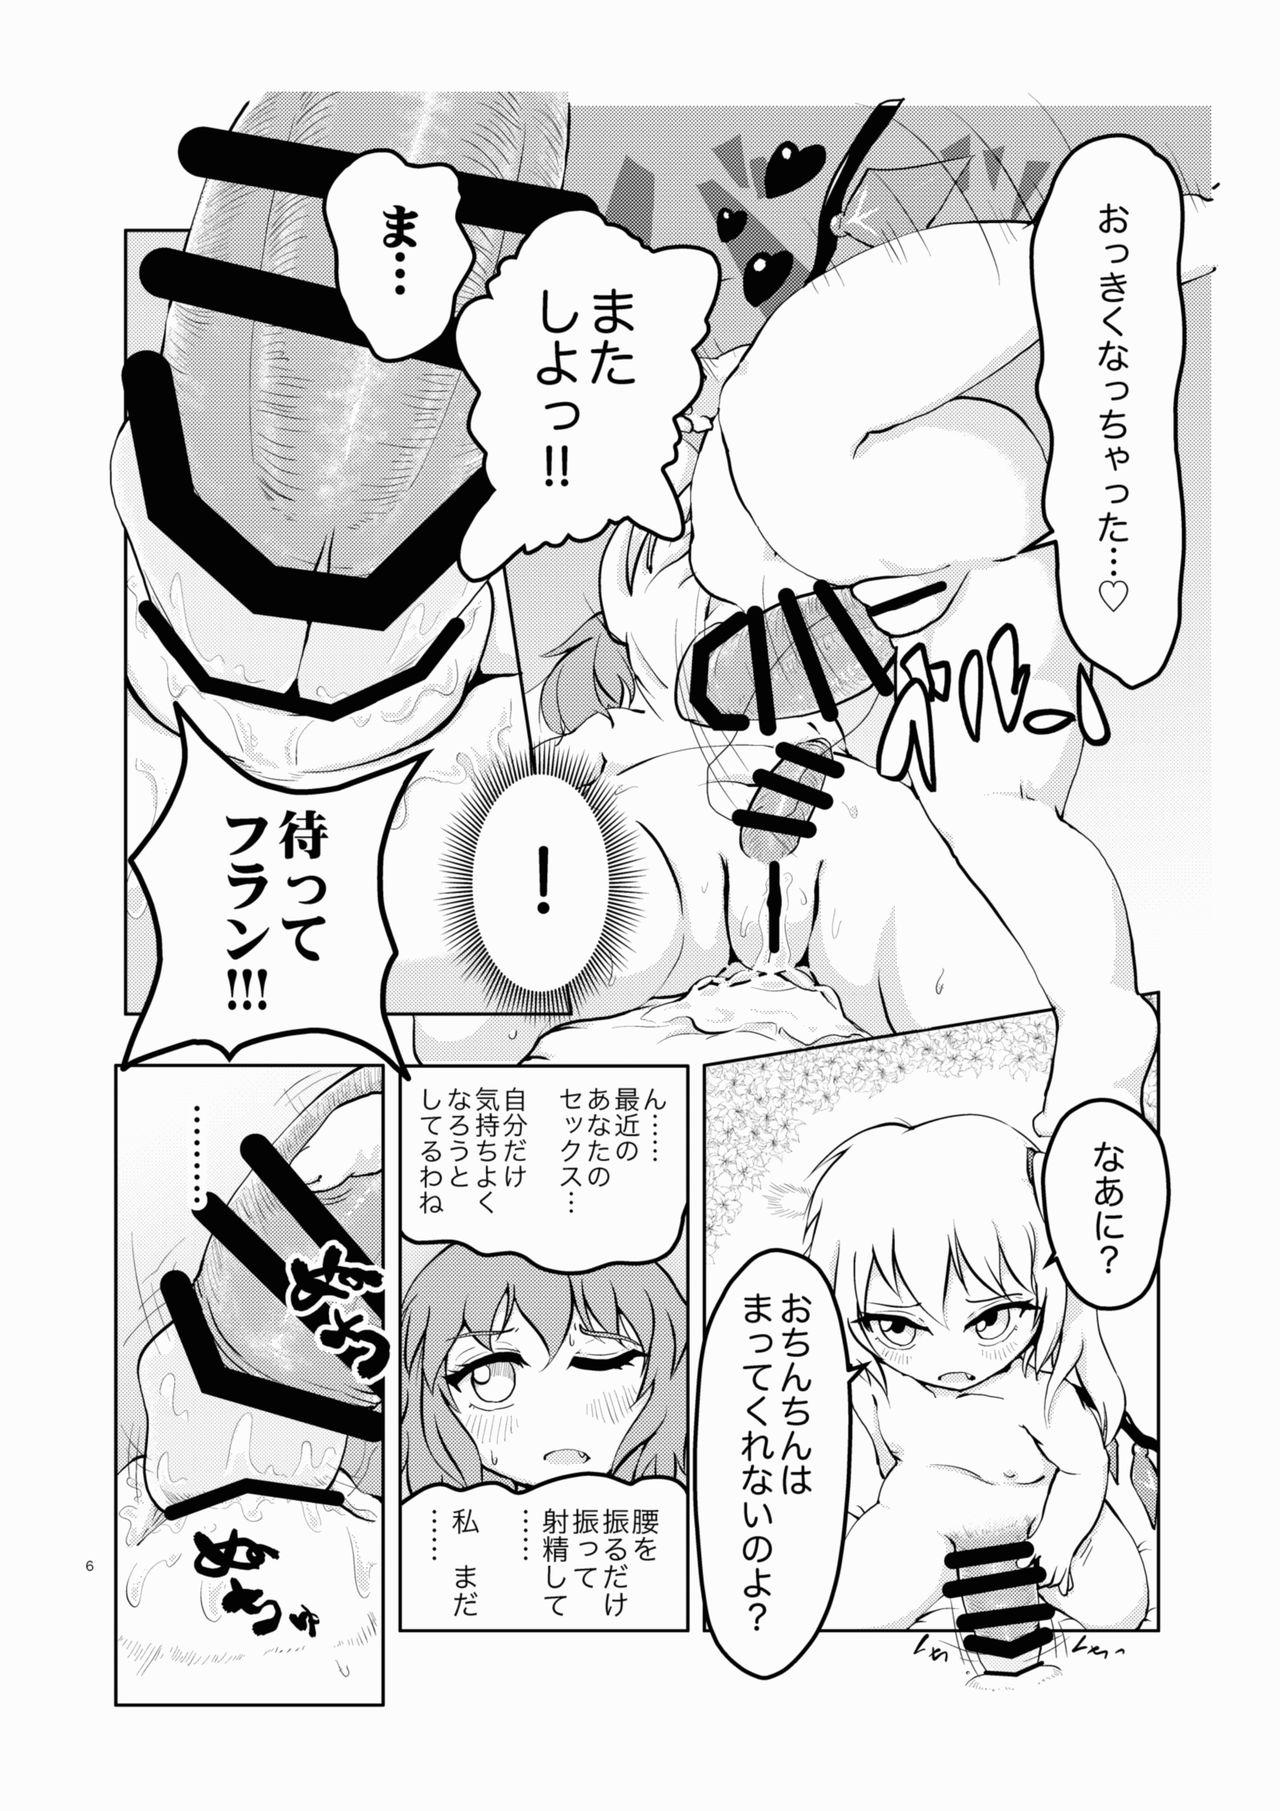 Girl On Girl Scarlet Conflict 1 - Touhou project Humiliation - Page 6